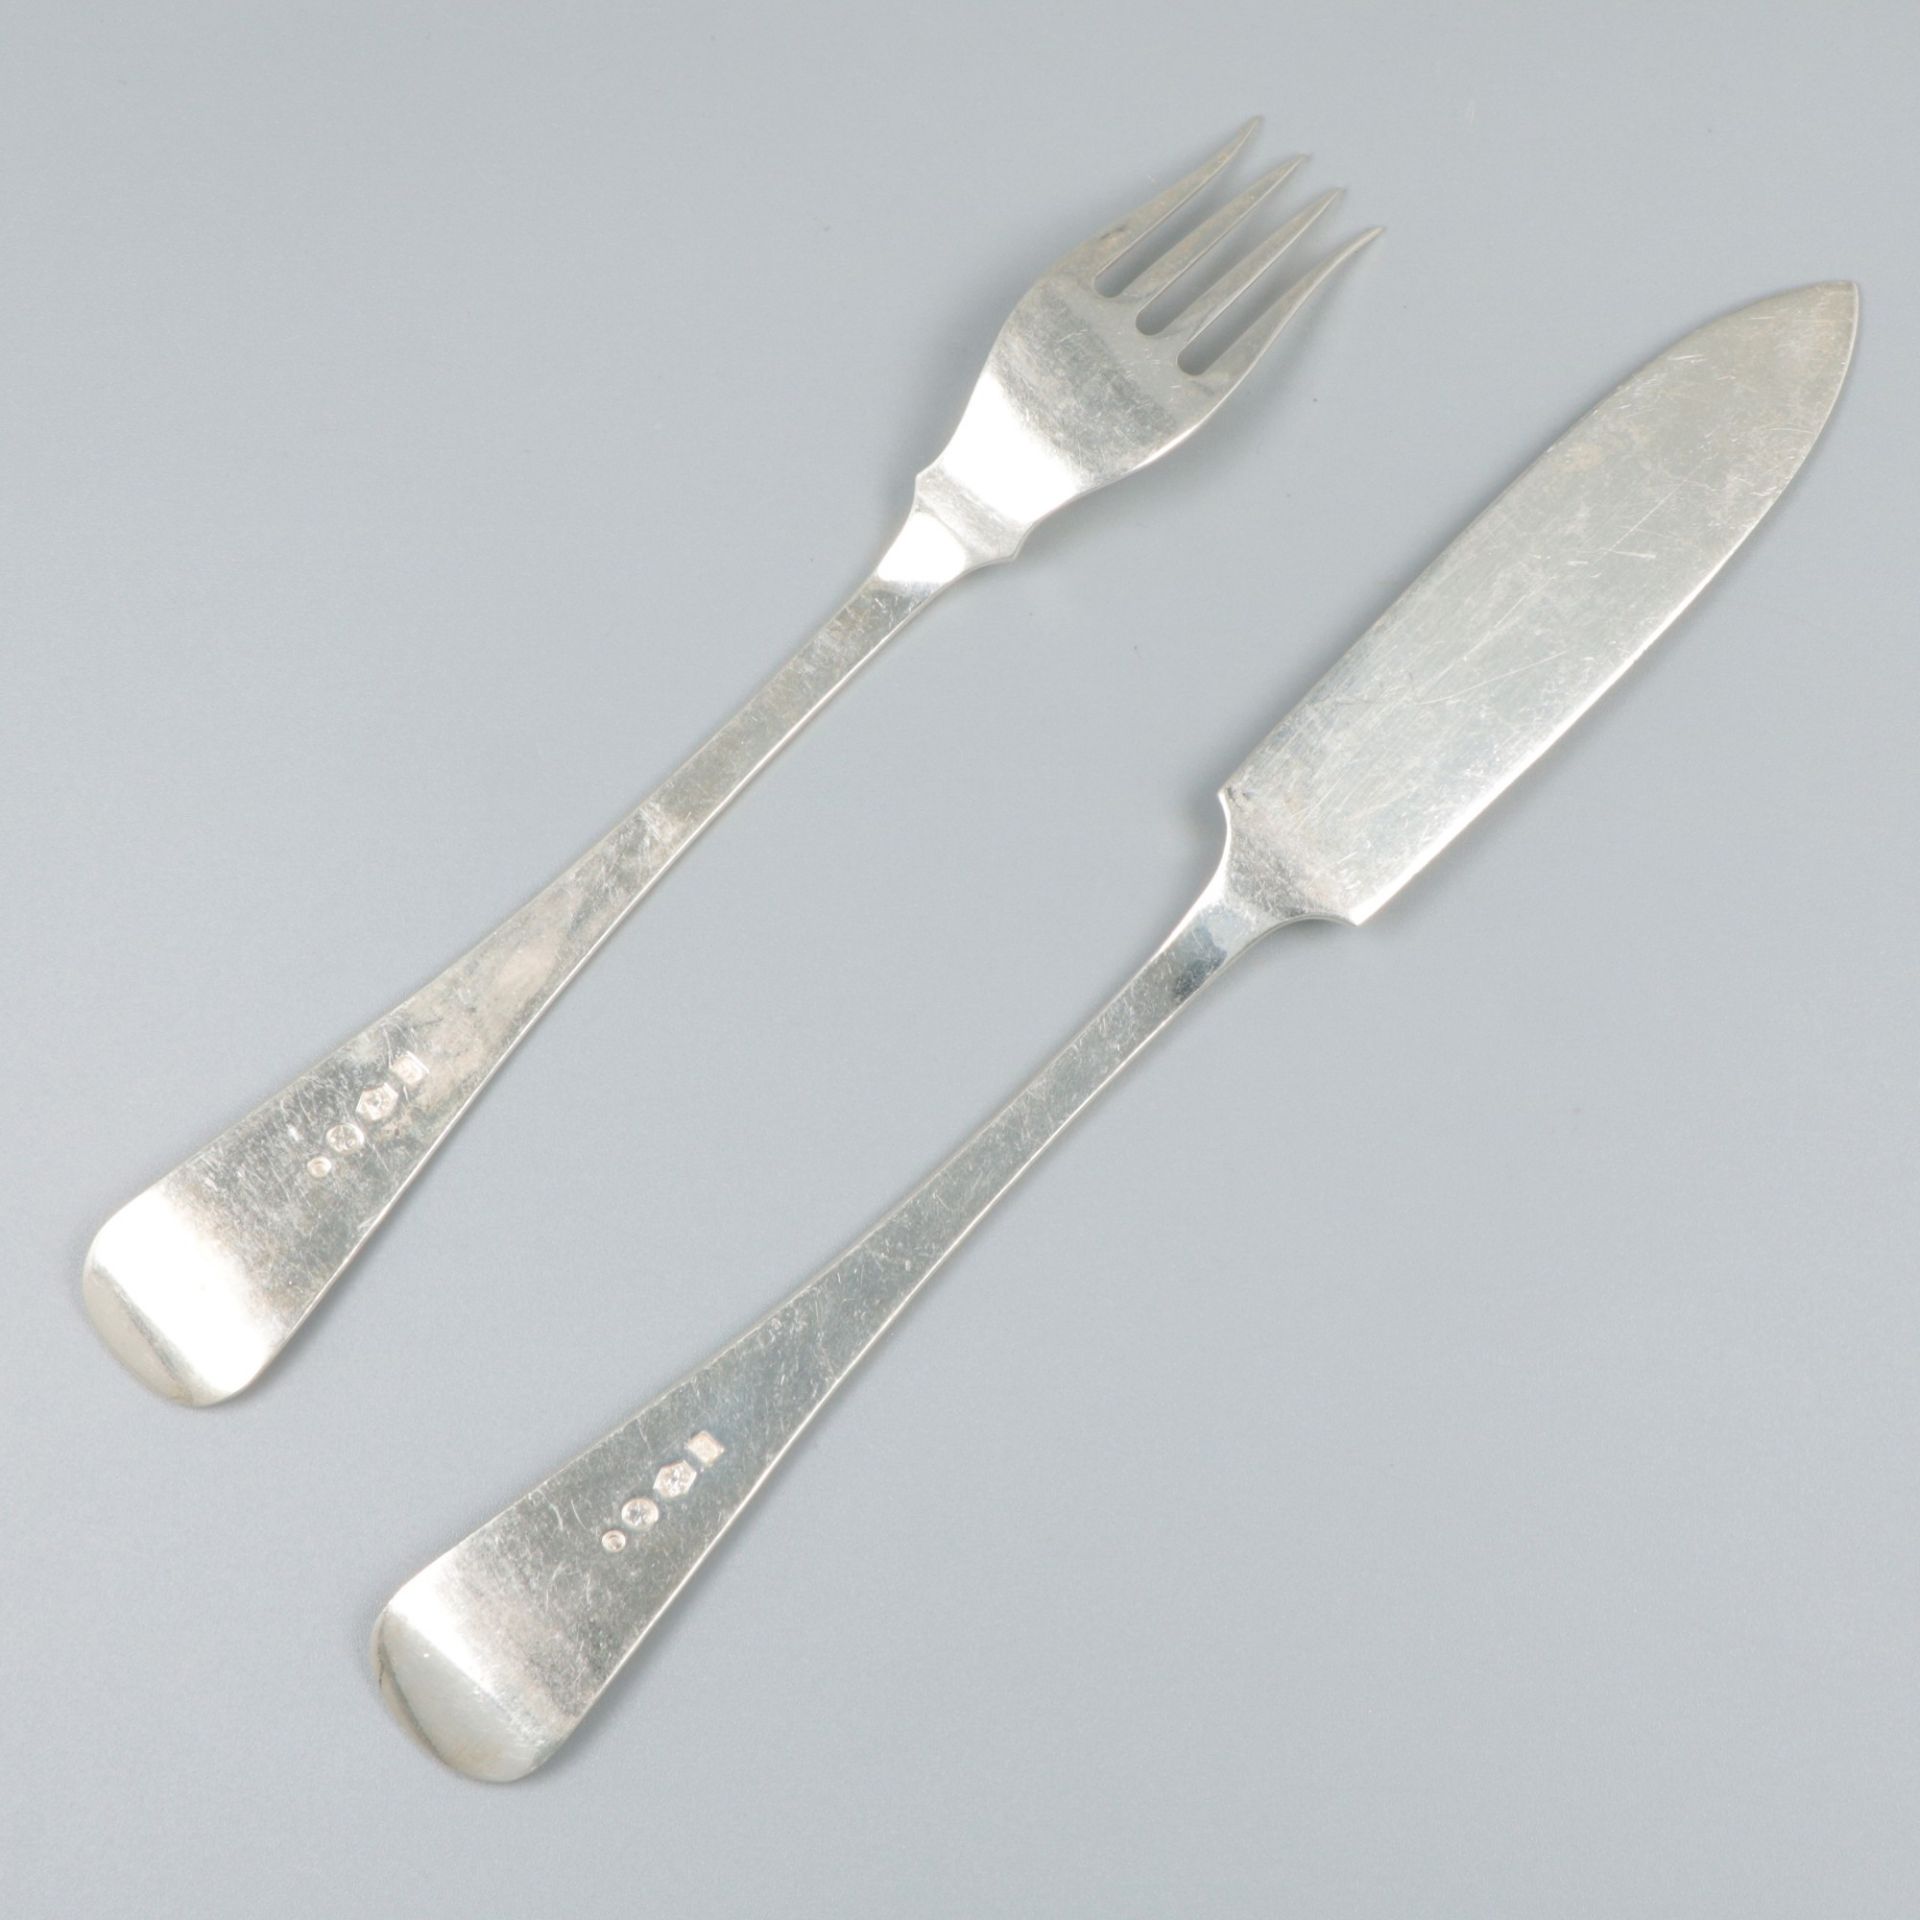 8-piece fish cutlery "Hollands Rondfilet", silver. - Image 3 of 6